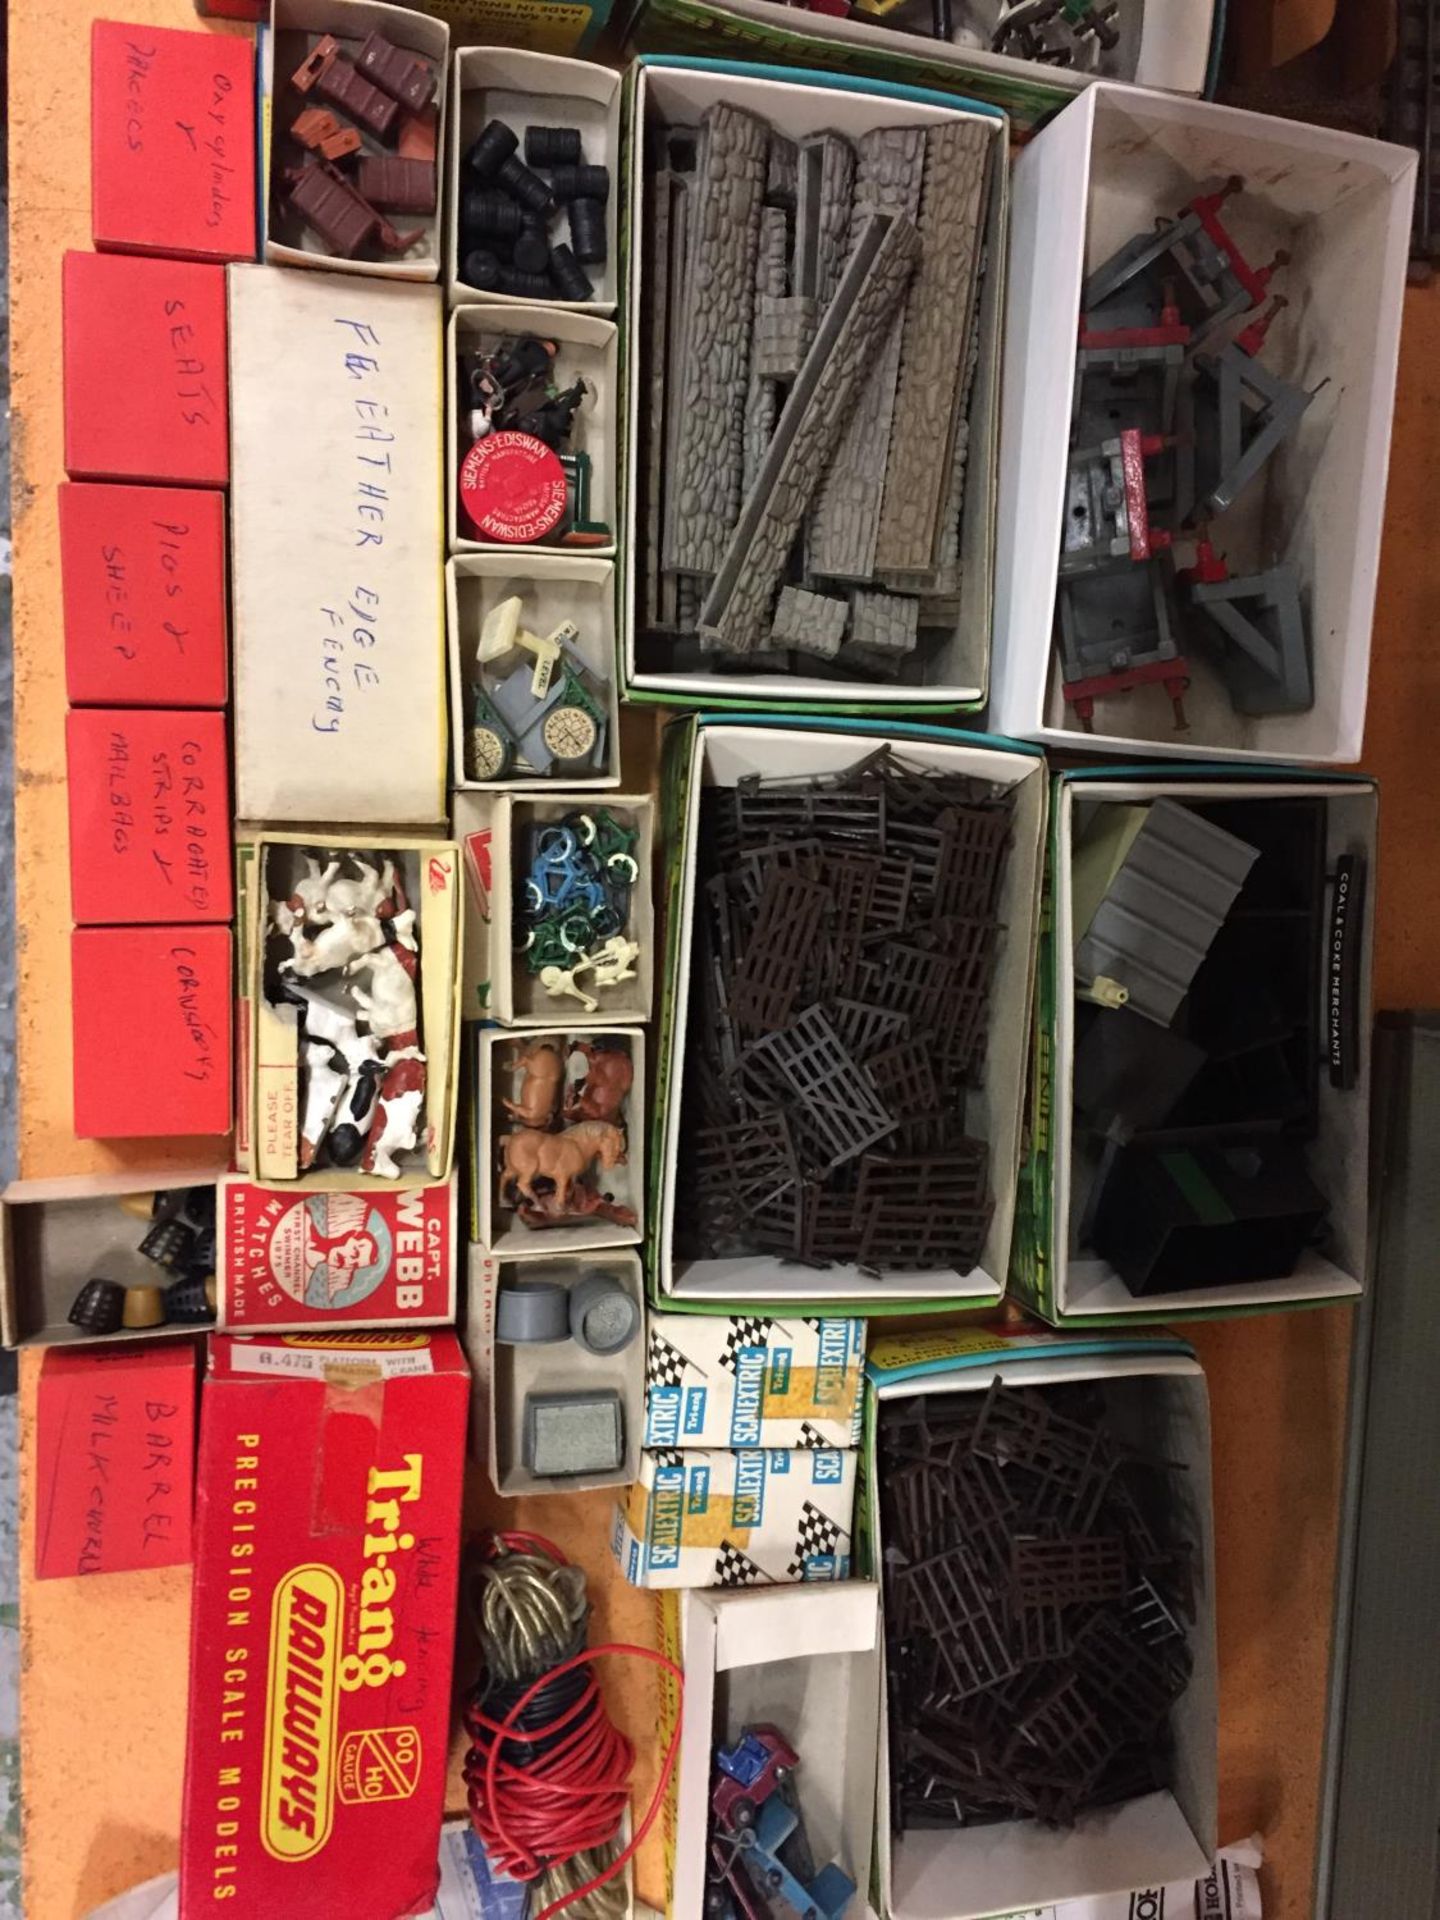 A VERY LARGE QUANTITY OF HORNBY MODEL RAILWAY ACCESSORIES - LEVEL CROSSING, SCENERY, BUFFERS, - Image 20 of 23